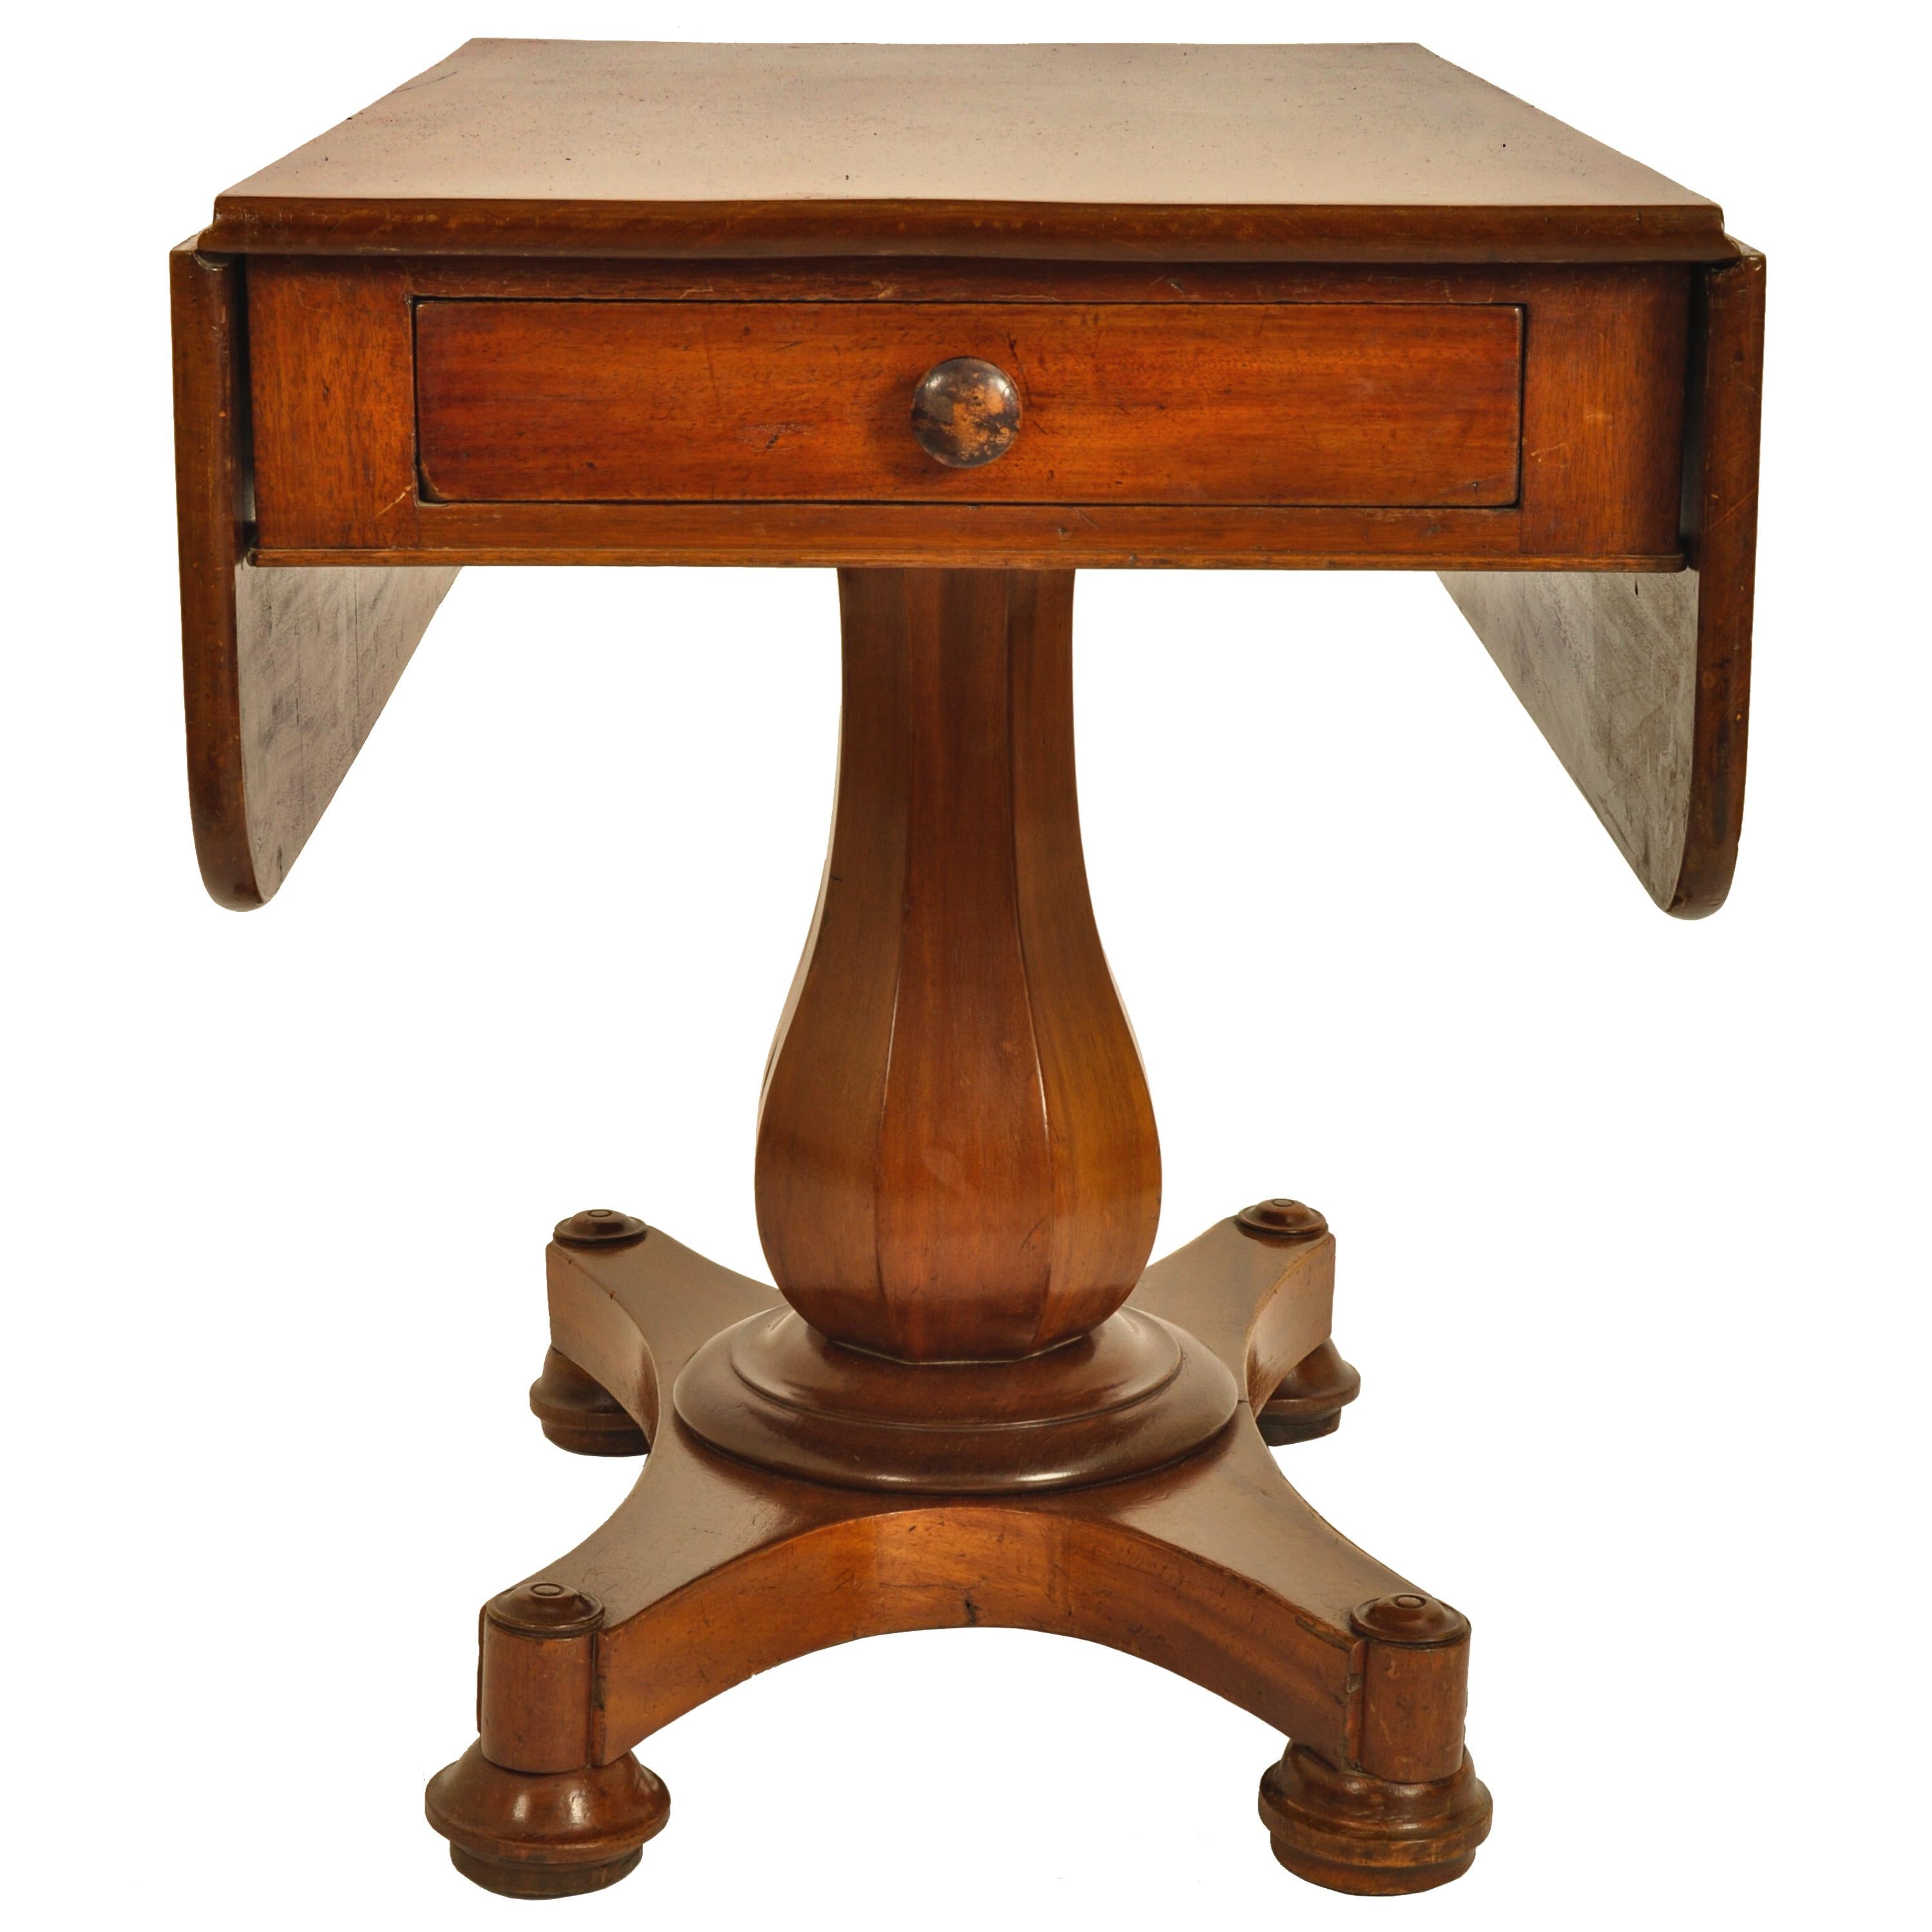 Antique American Classical mahogany drop leaf pedestal Pembroke ccard/tea table attributed John Needles of Baltimore, circa 1840. The table made of figured mahogany with twin drop leaves and a single drawer to the center. The table standing on a